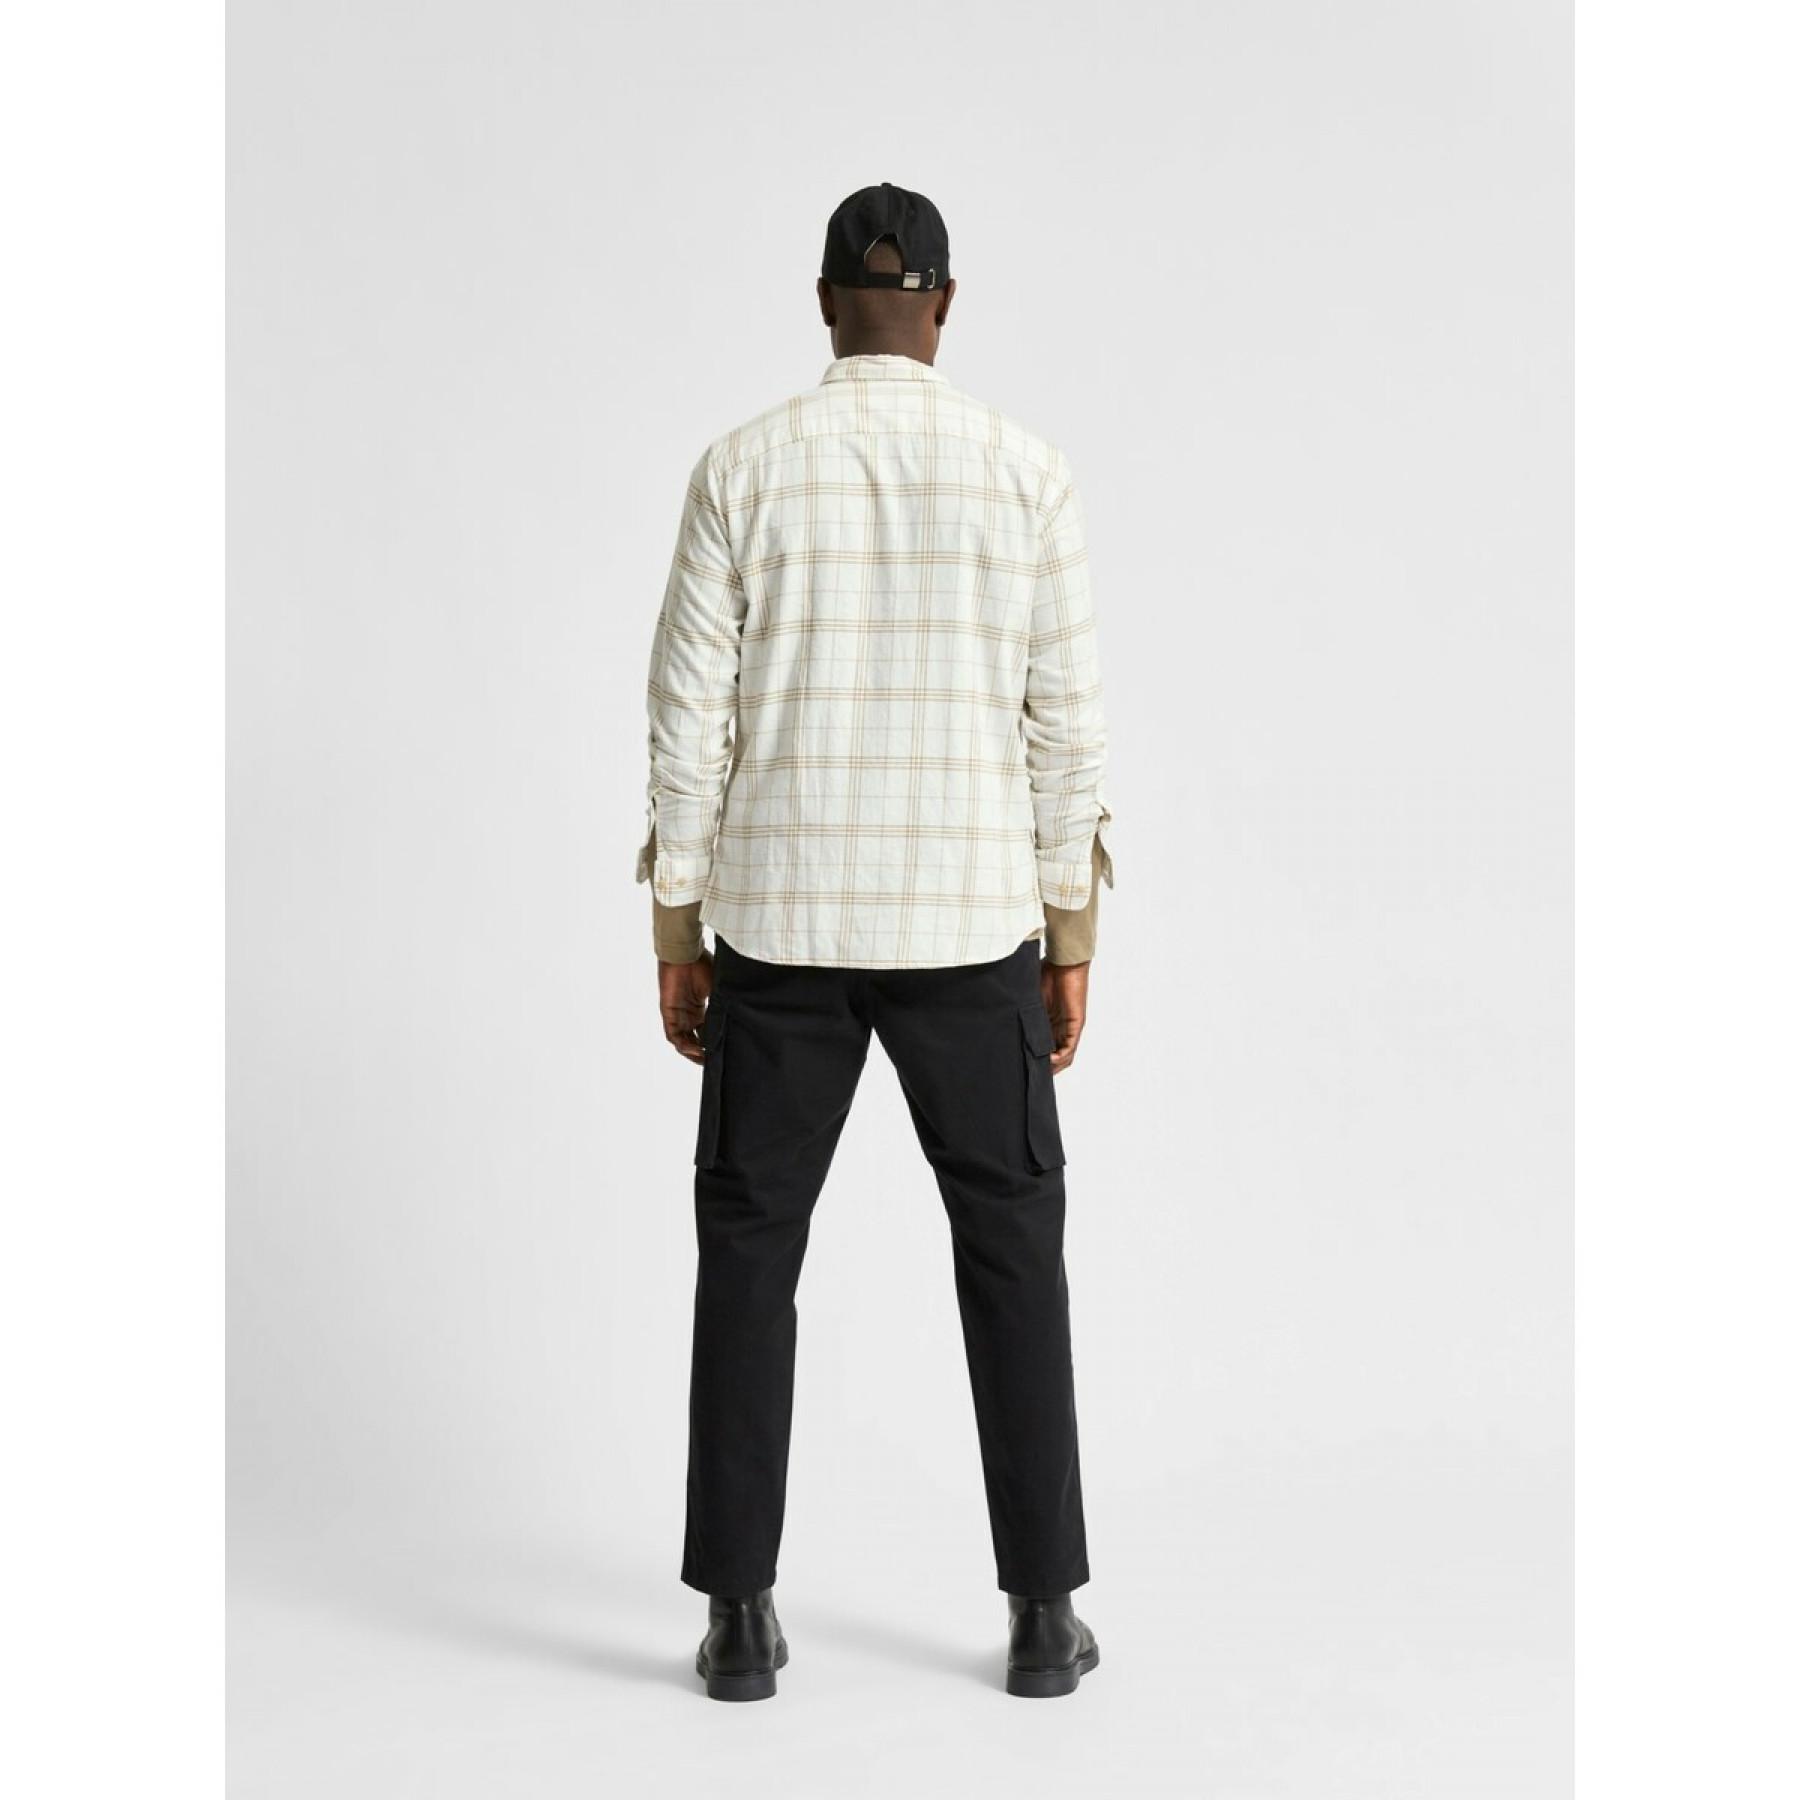 Hemd Selected flannel manches longues slim